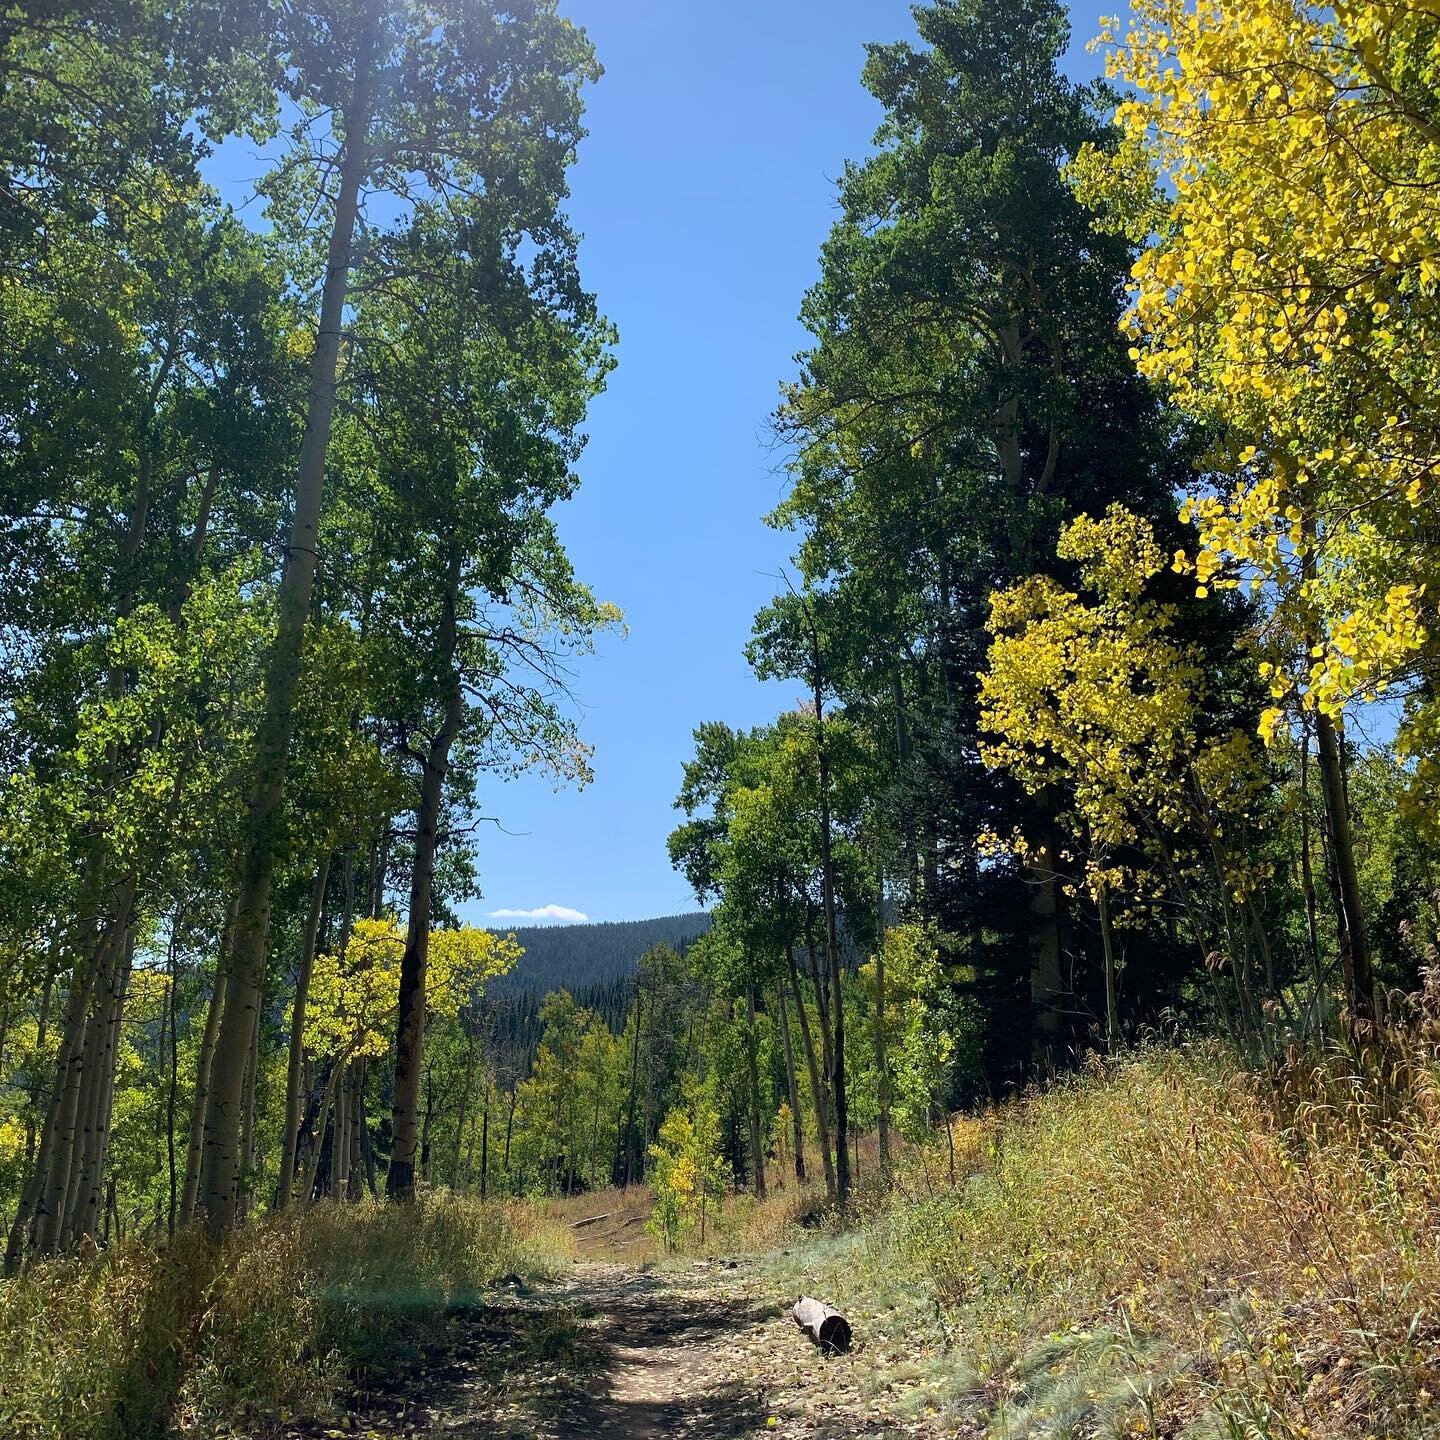 Meadow Mountain to Whiskey Creek to Everkrisp. What more is there to say. Such a great fall ride. #minturn #usfs #fall #mountainbike #beautiful